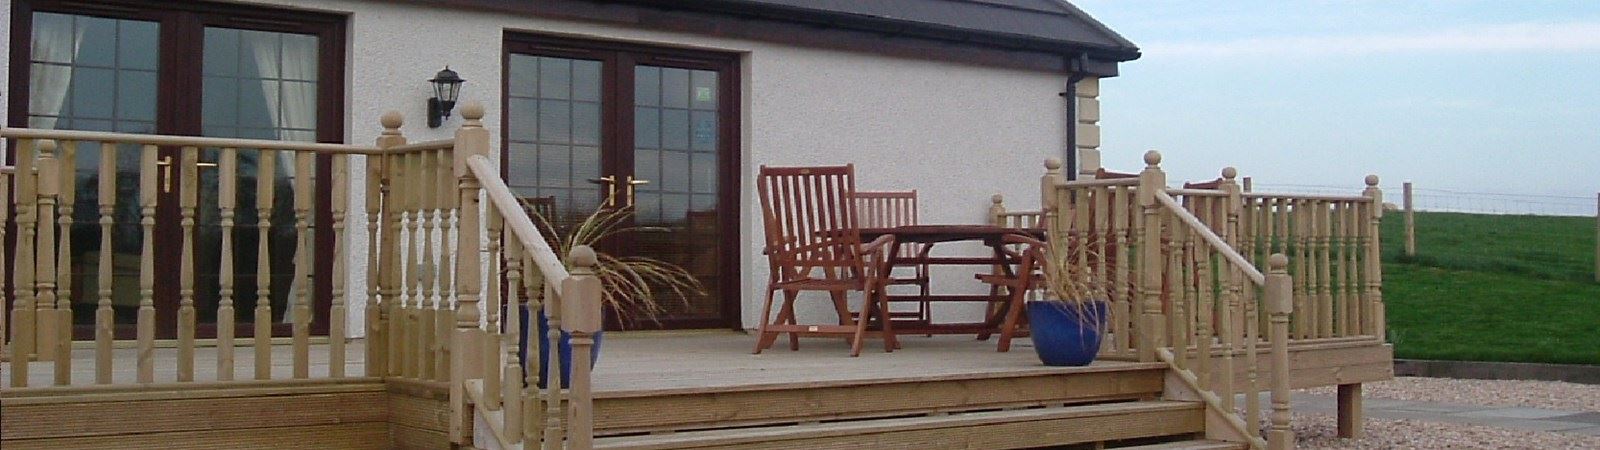 Lawford Lodge, Falkirk|Self Catering Cottages in Falkirk